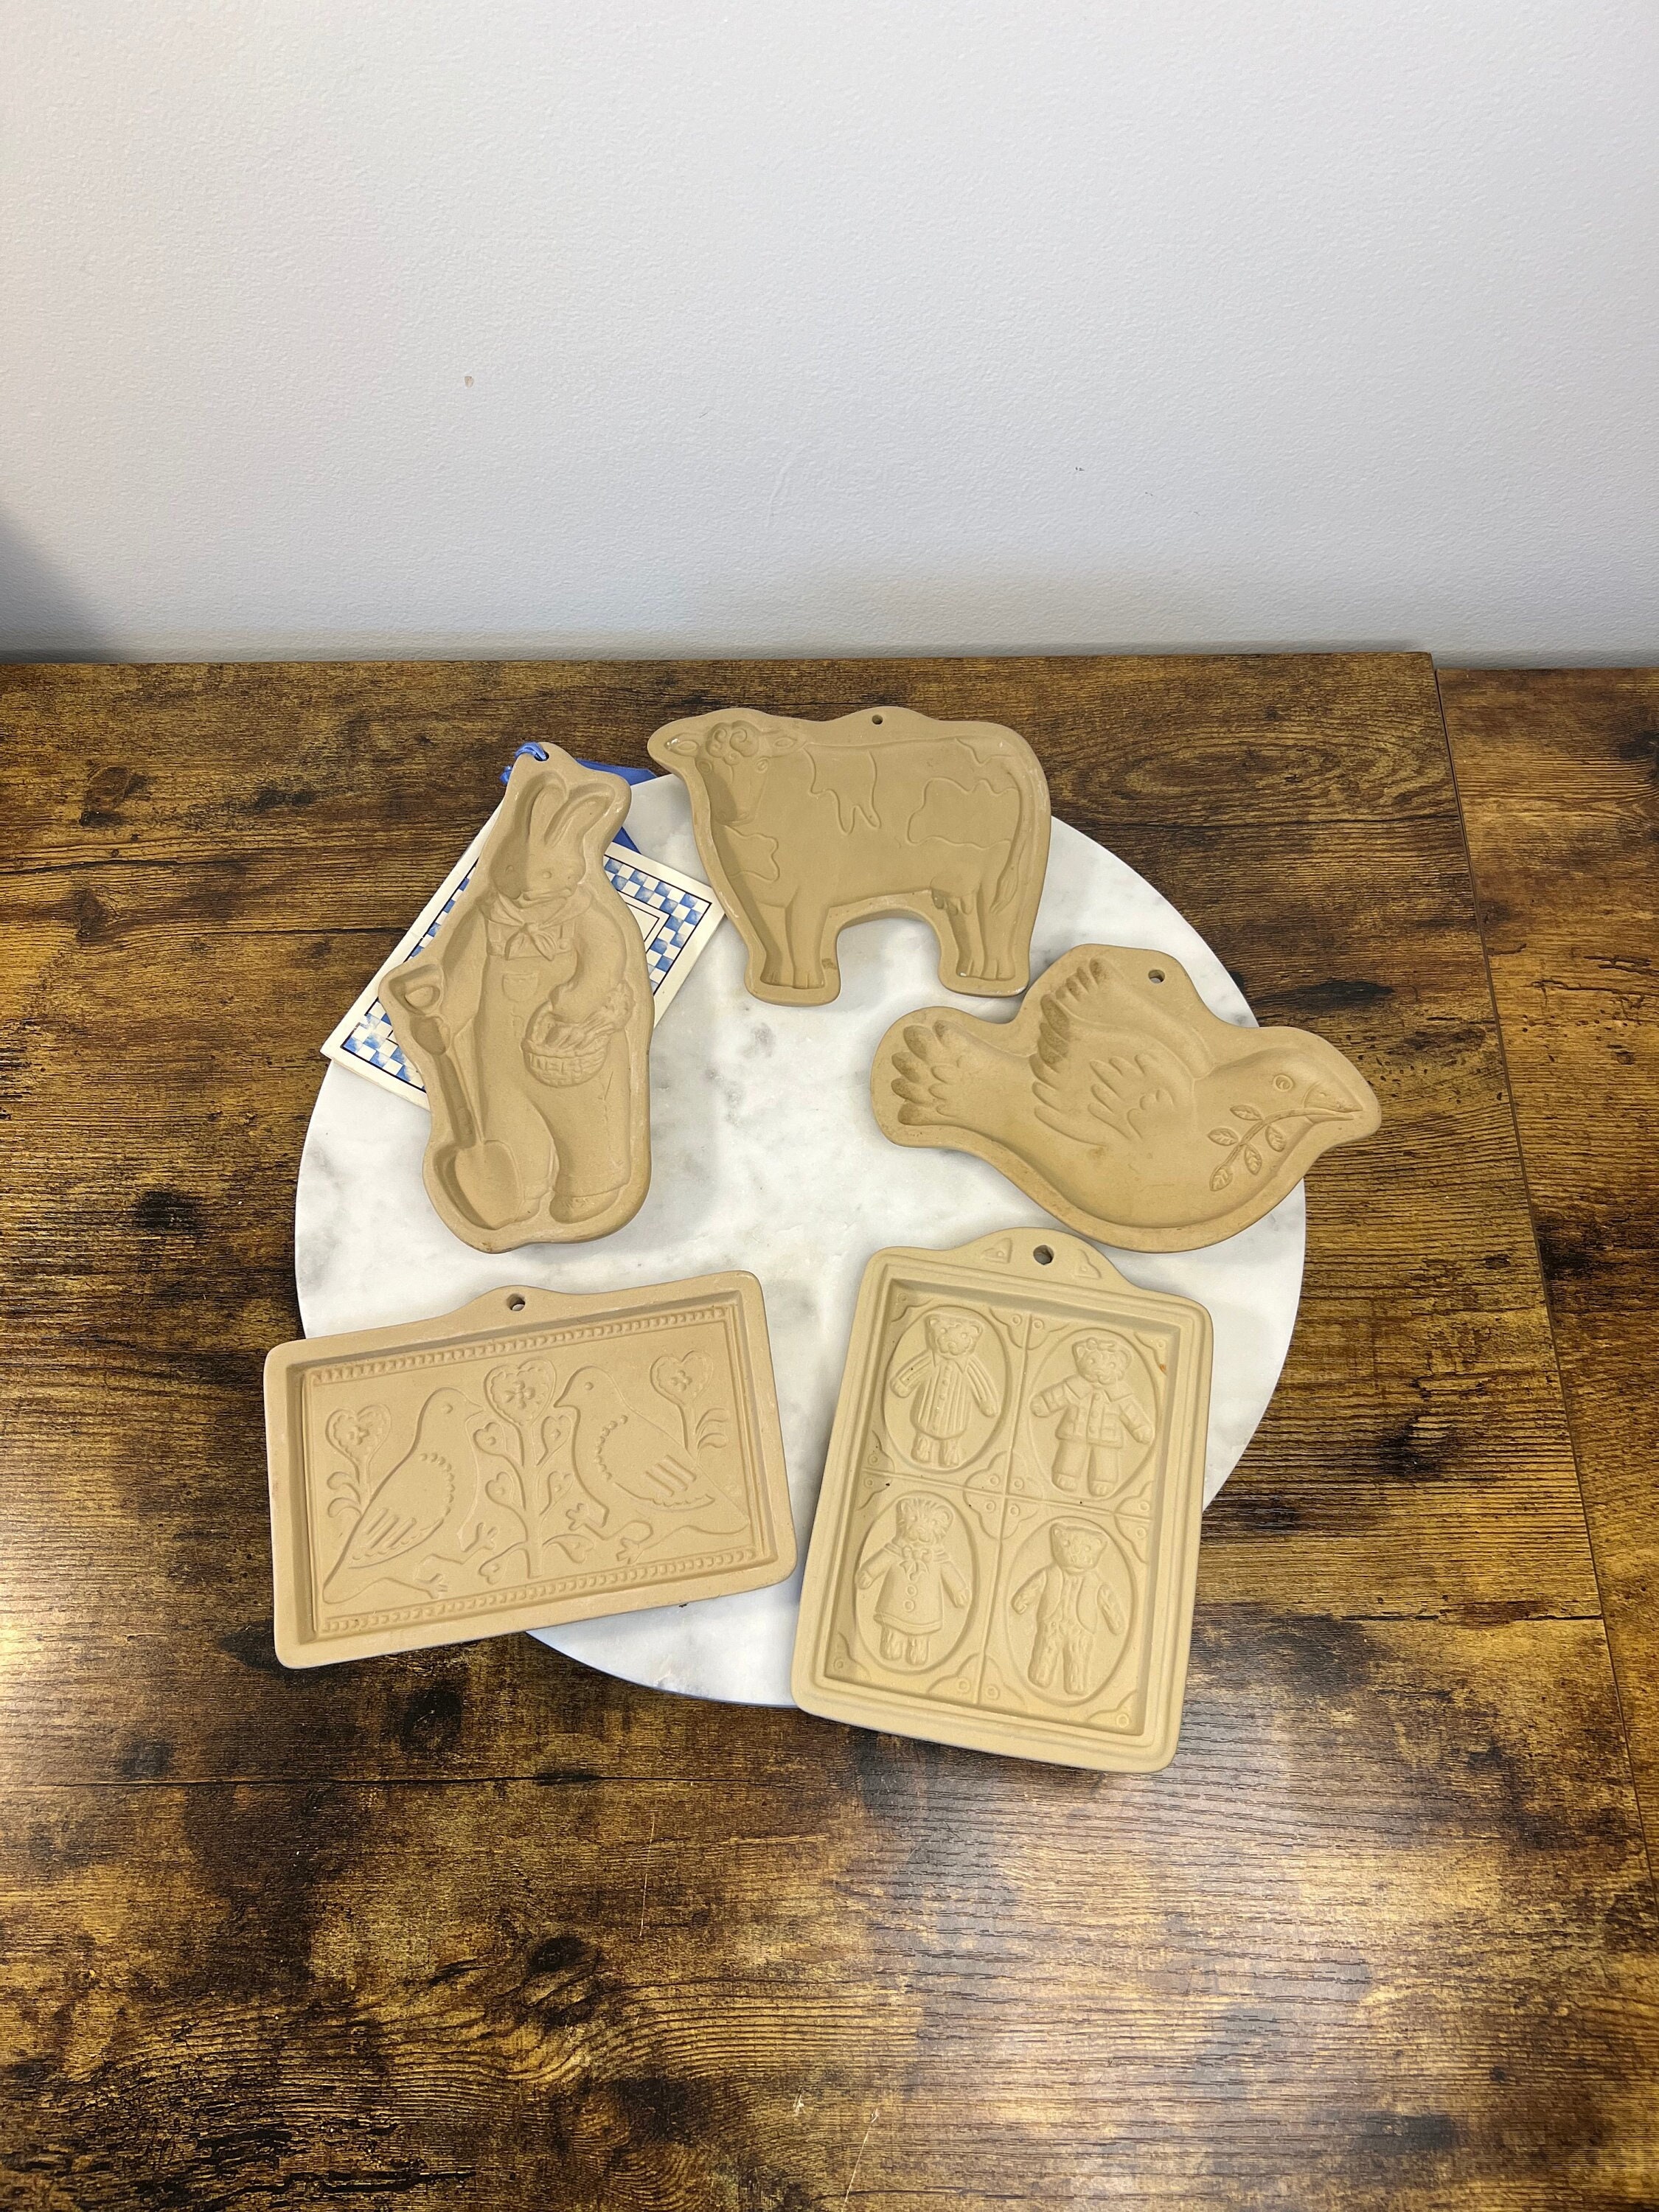 ASSORTED HILL DESIGN BROWN BAG COOKIE ART MOLDS - YOU CHOOSE!